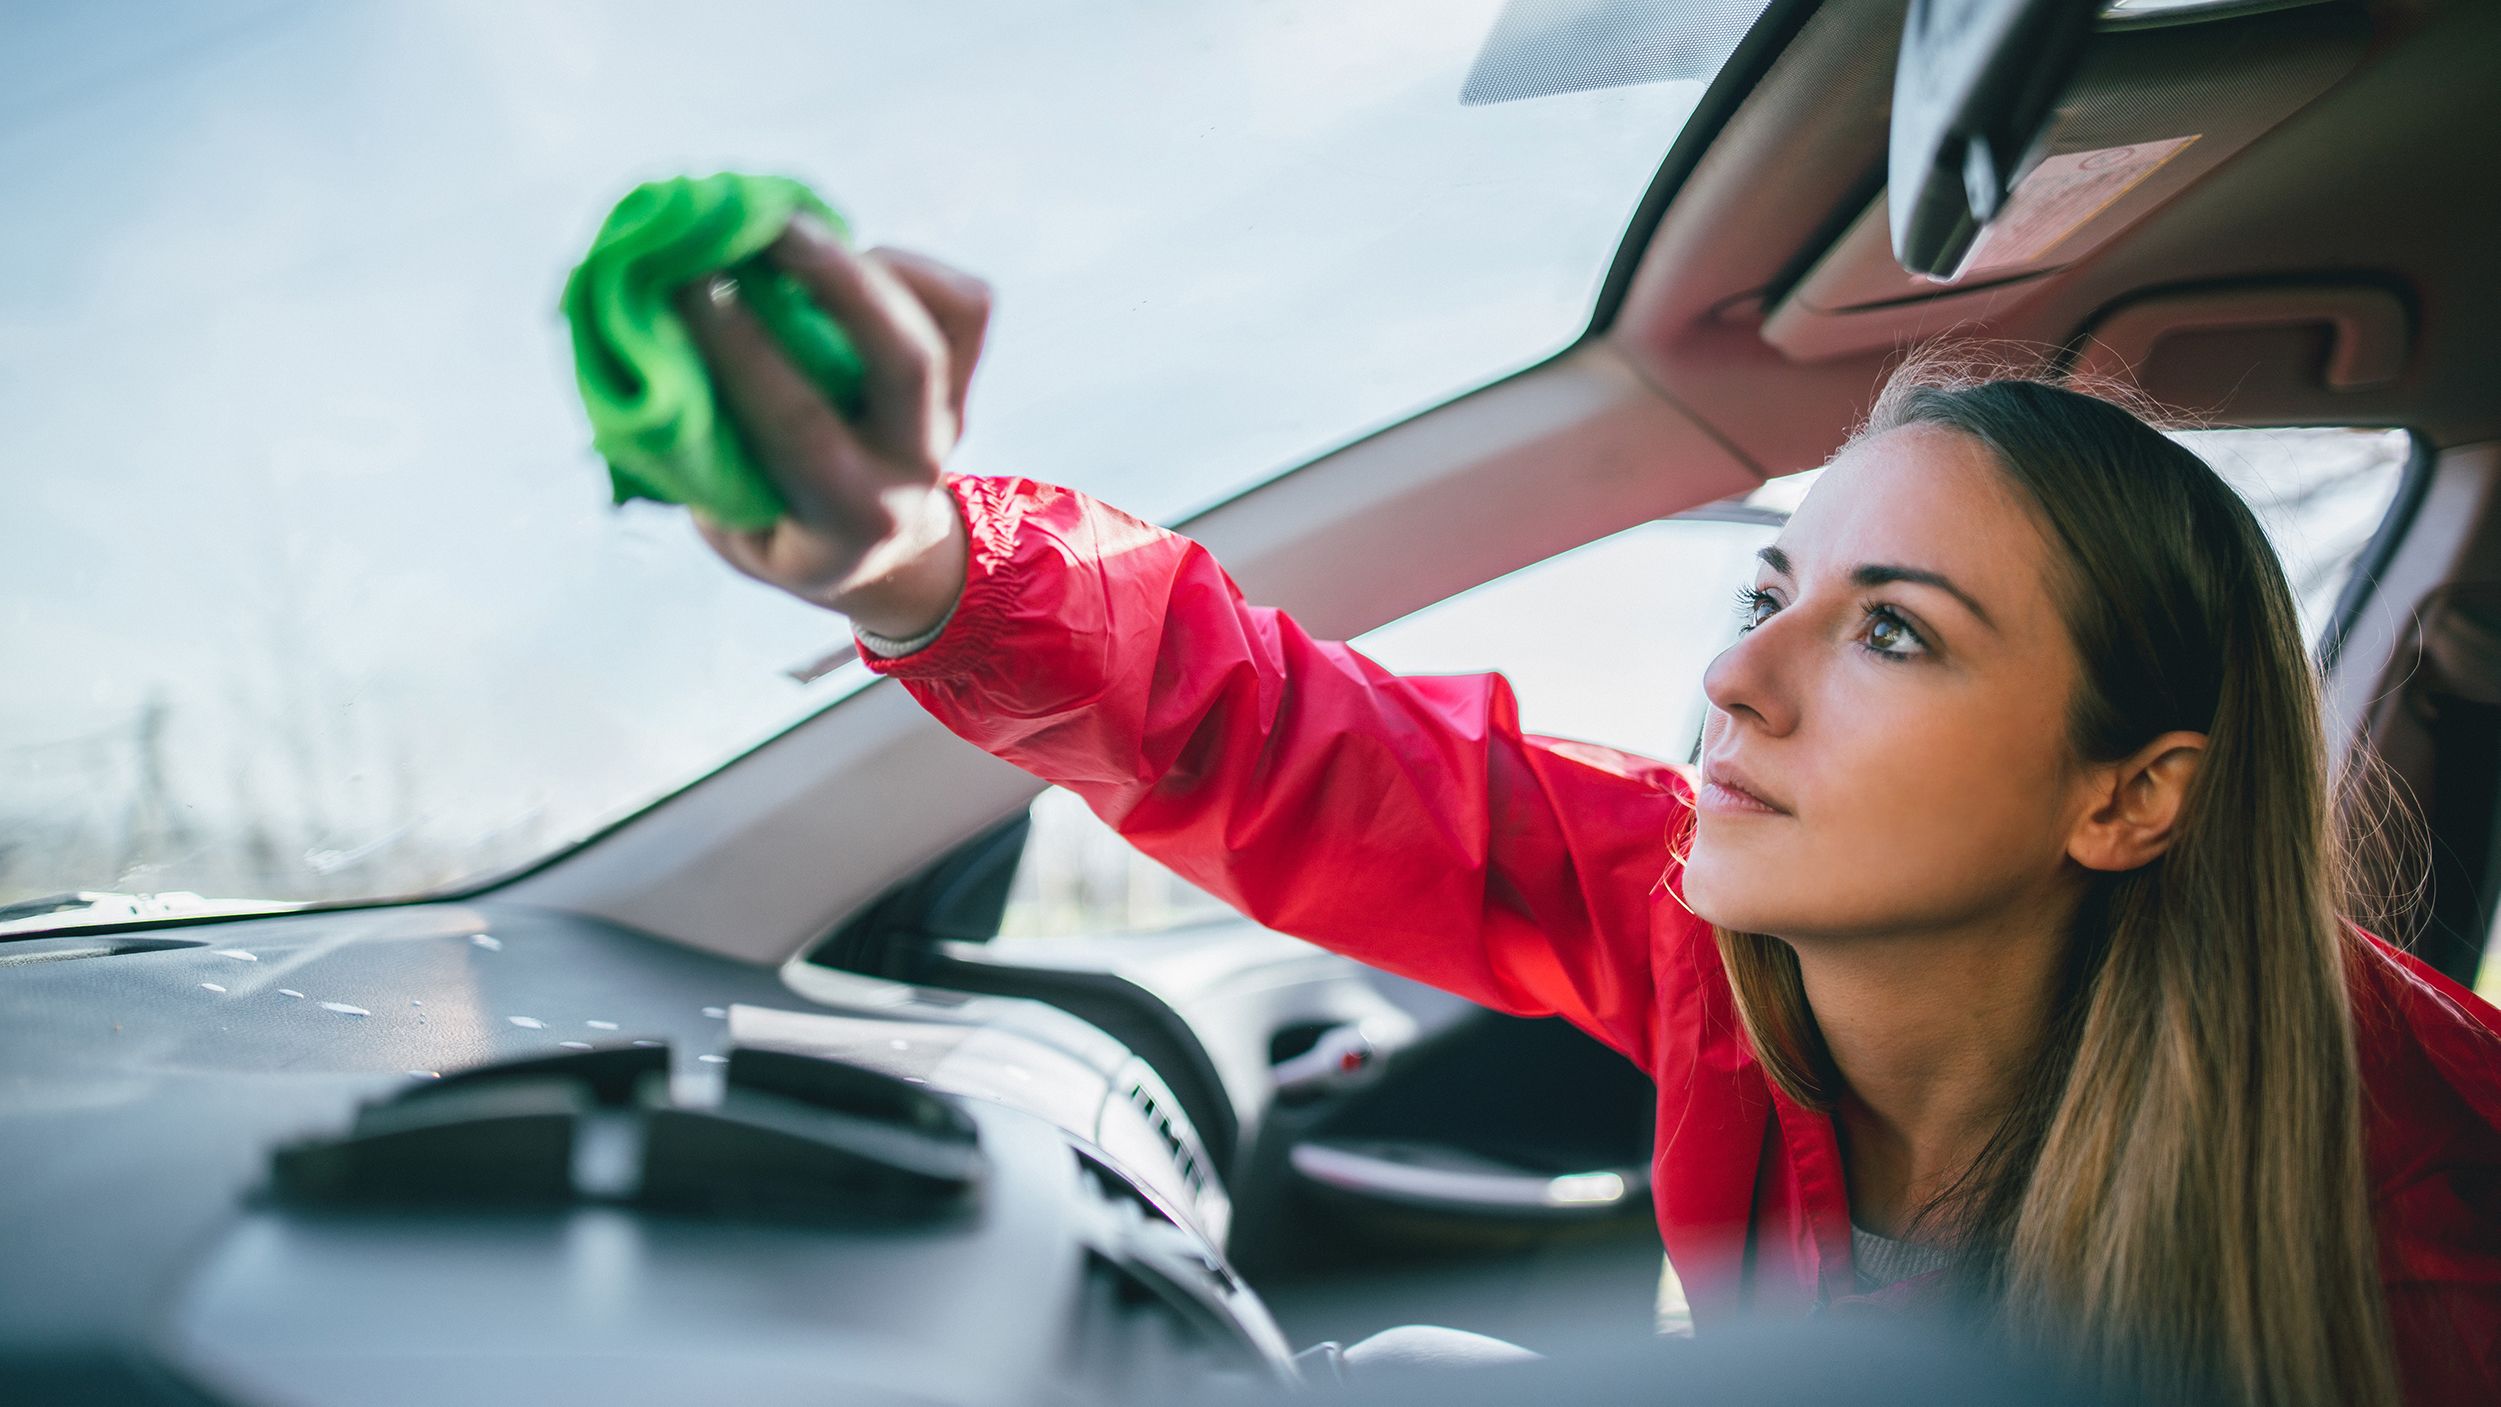 How to clean your car's interior for a deep clean